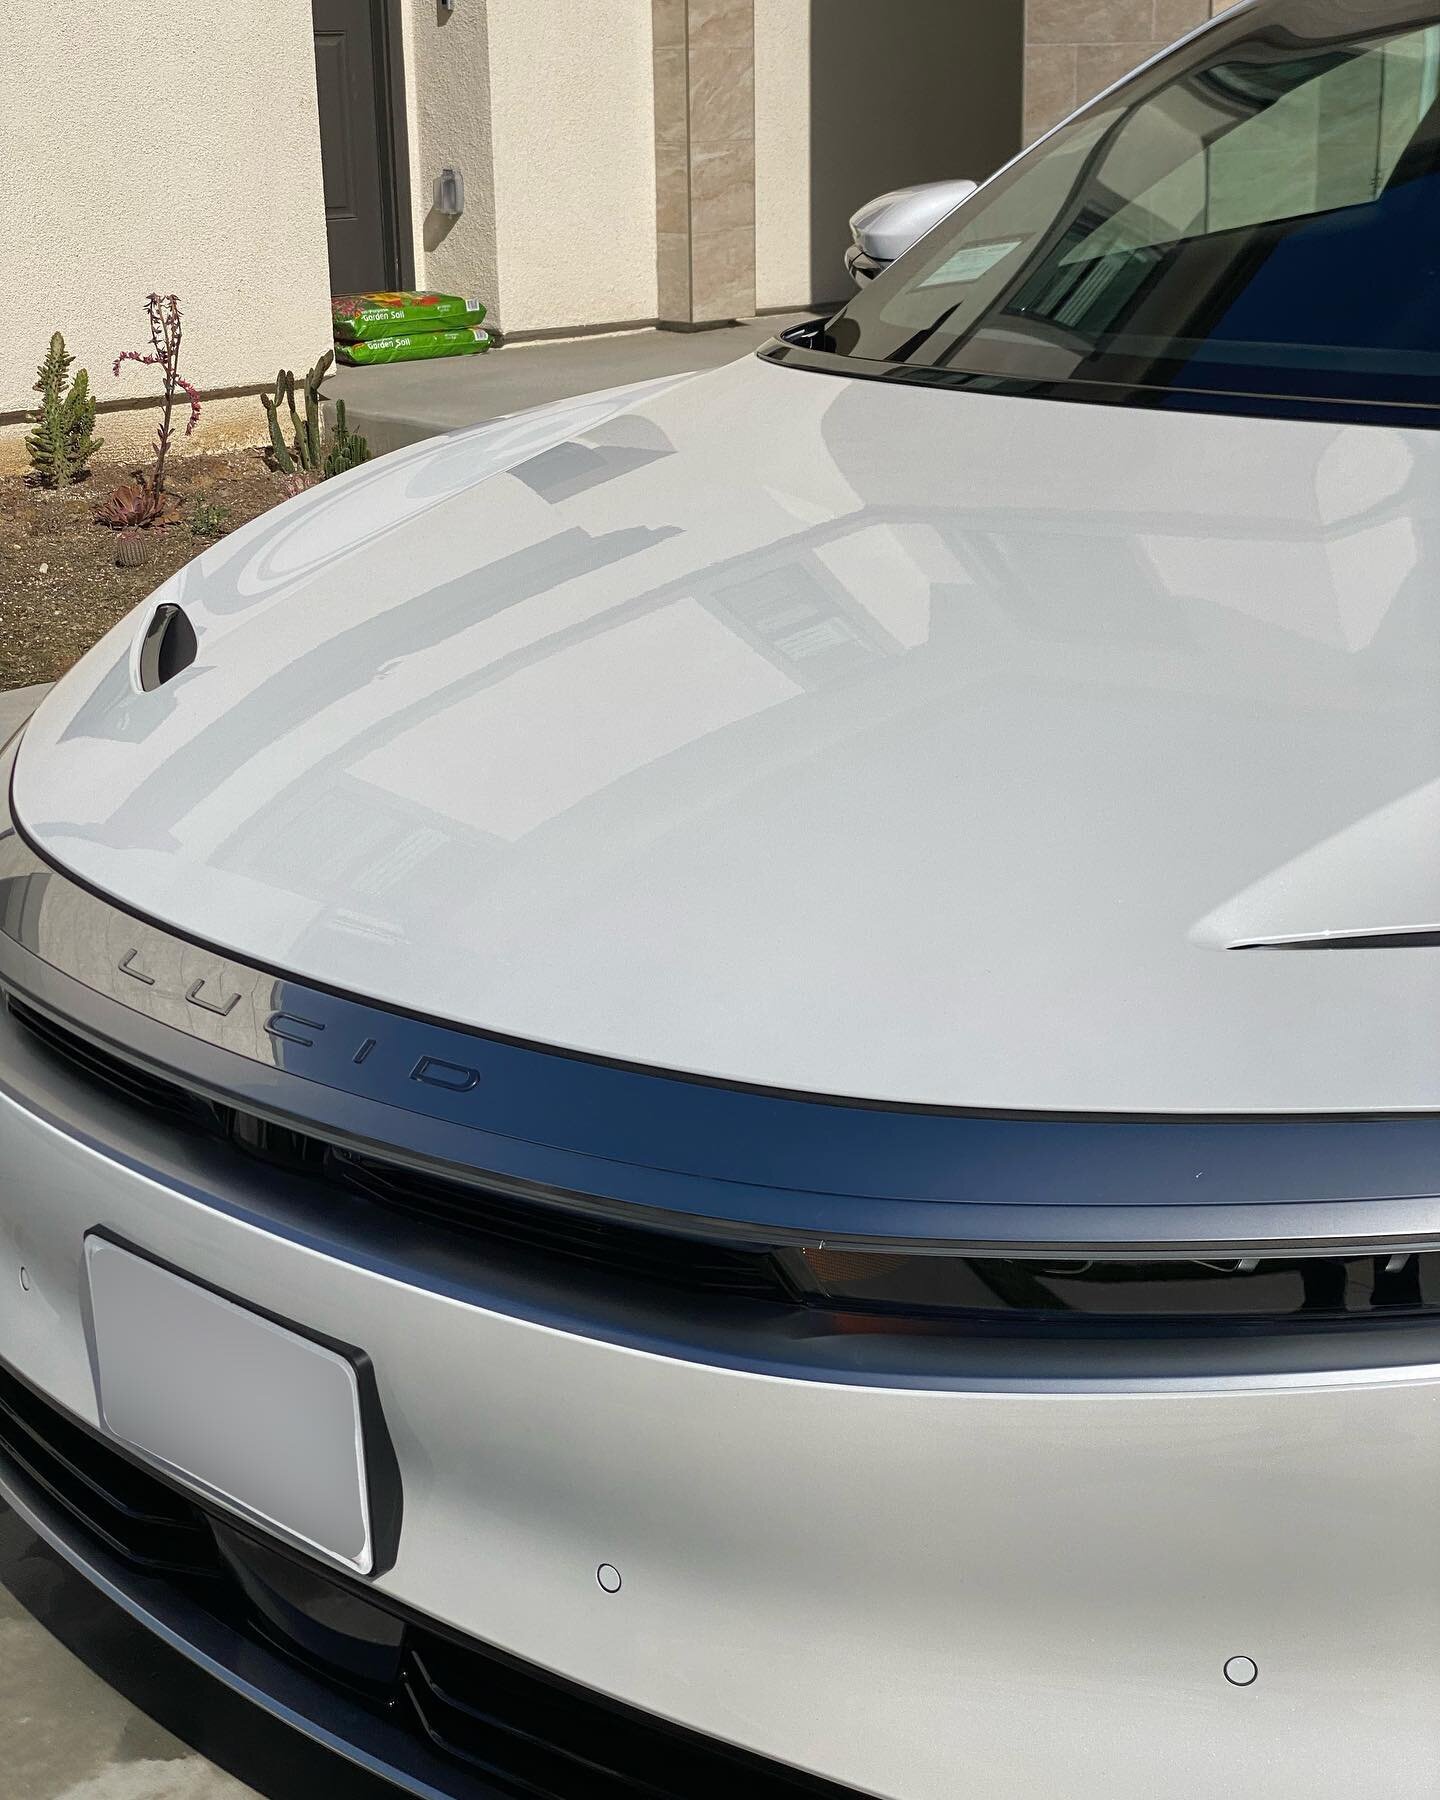 2023 Lucid Air Touring Edition received a Clarity Wash + Mini-Interior Detail #lucidair #mobiledetailing #sandiego #luxury #services